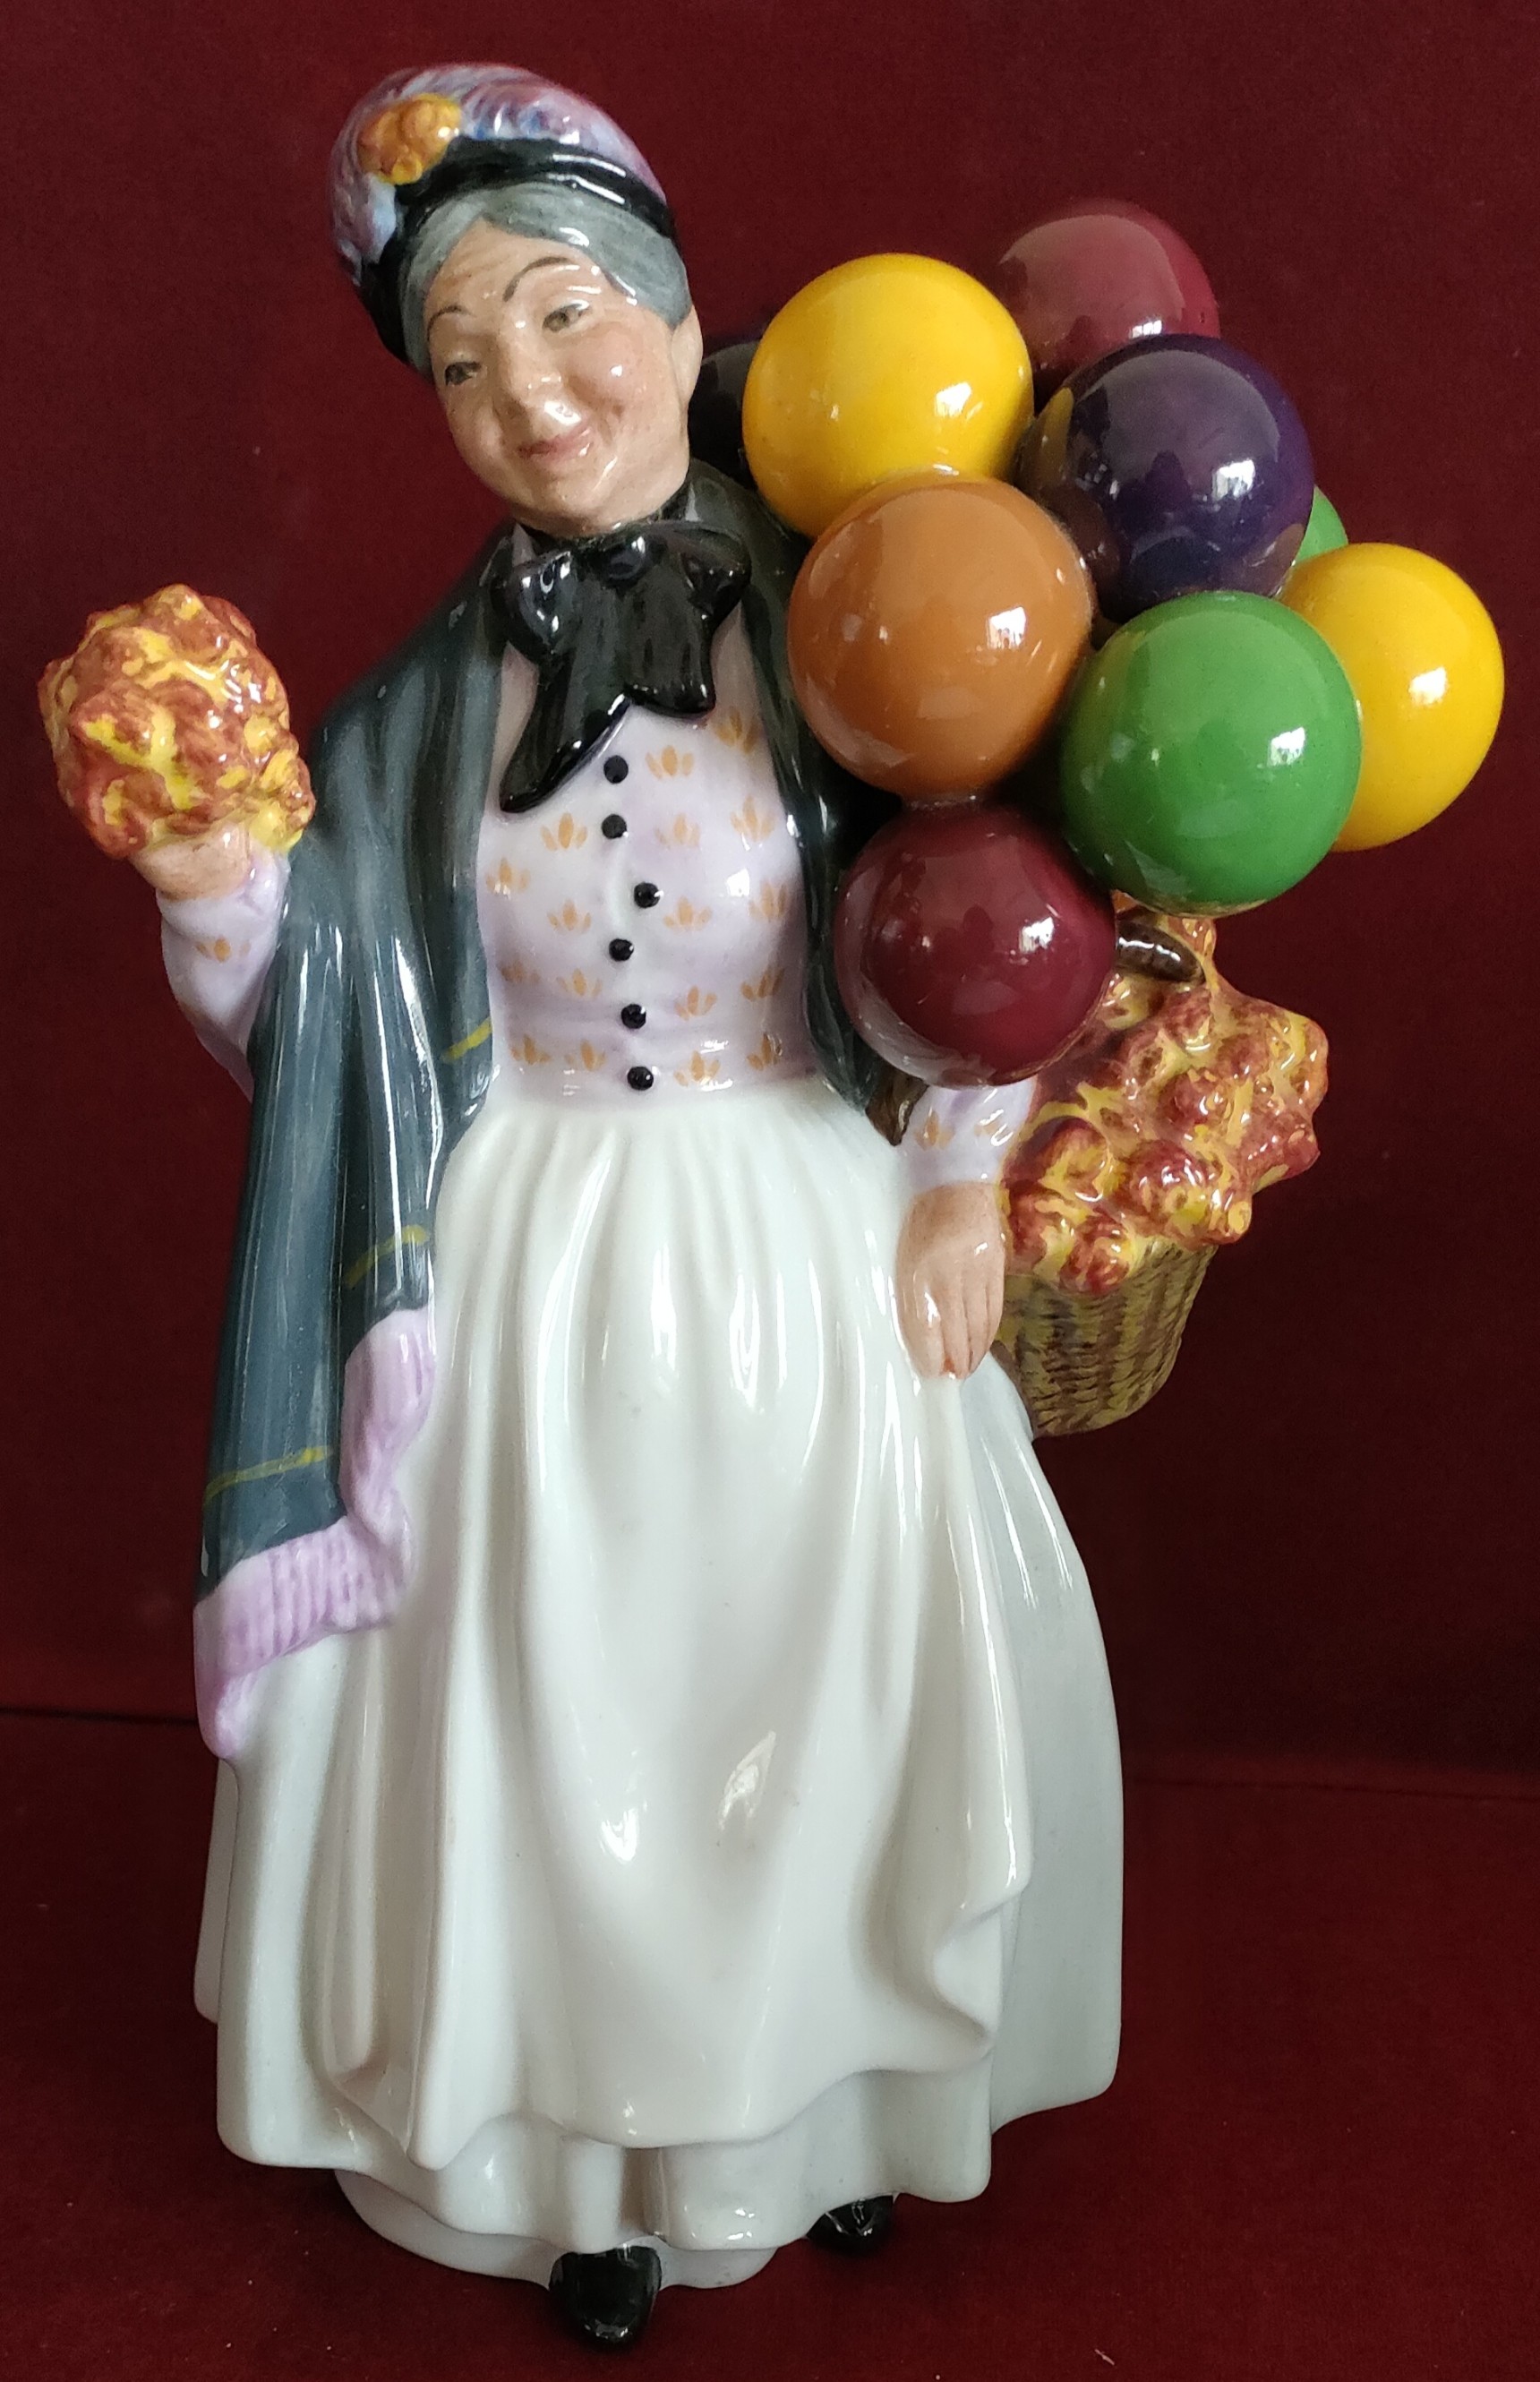 ROYAL DOULTON GLAZED CERAMIC FIGURE - BIDDY PENNY FARTHING, HN1843 IN REASONABLE CONDITION